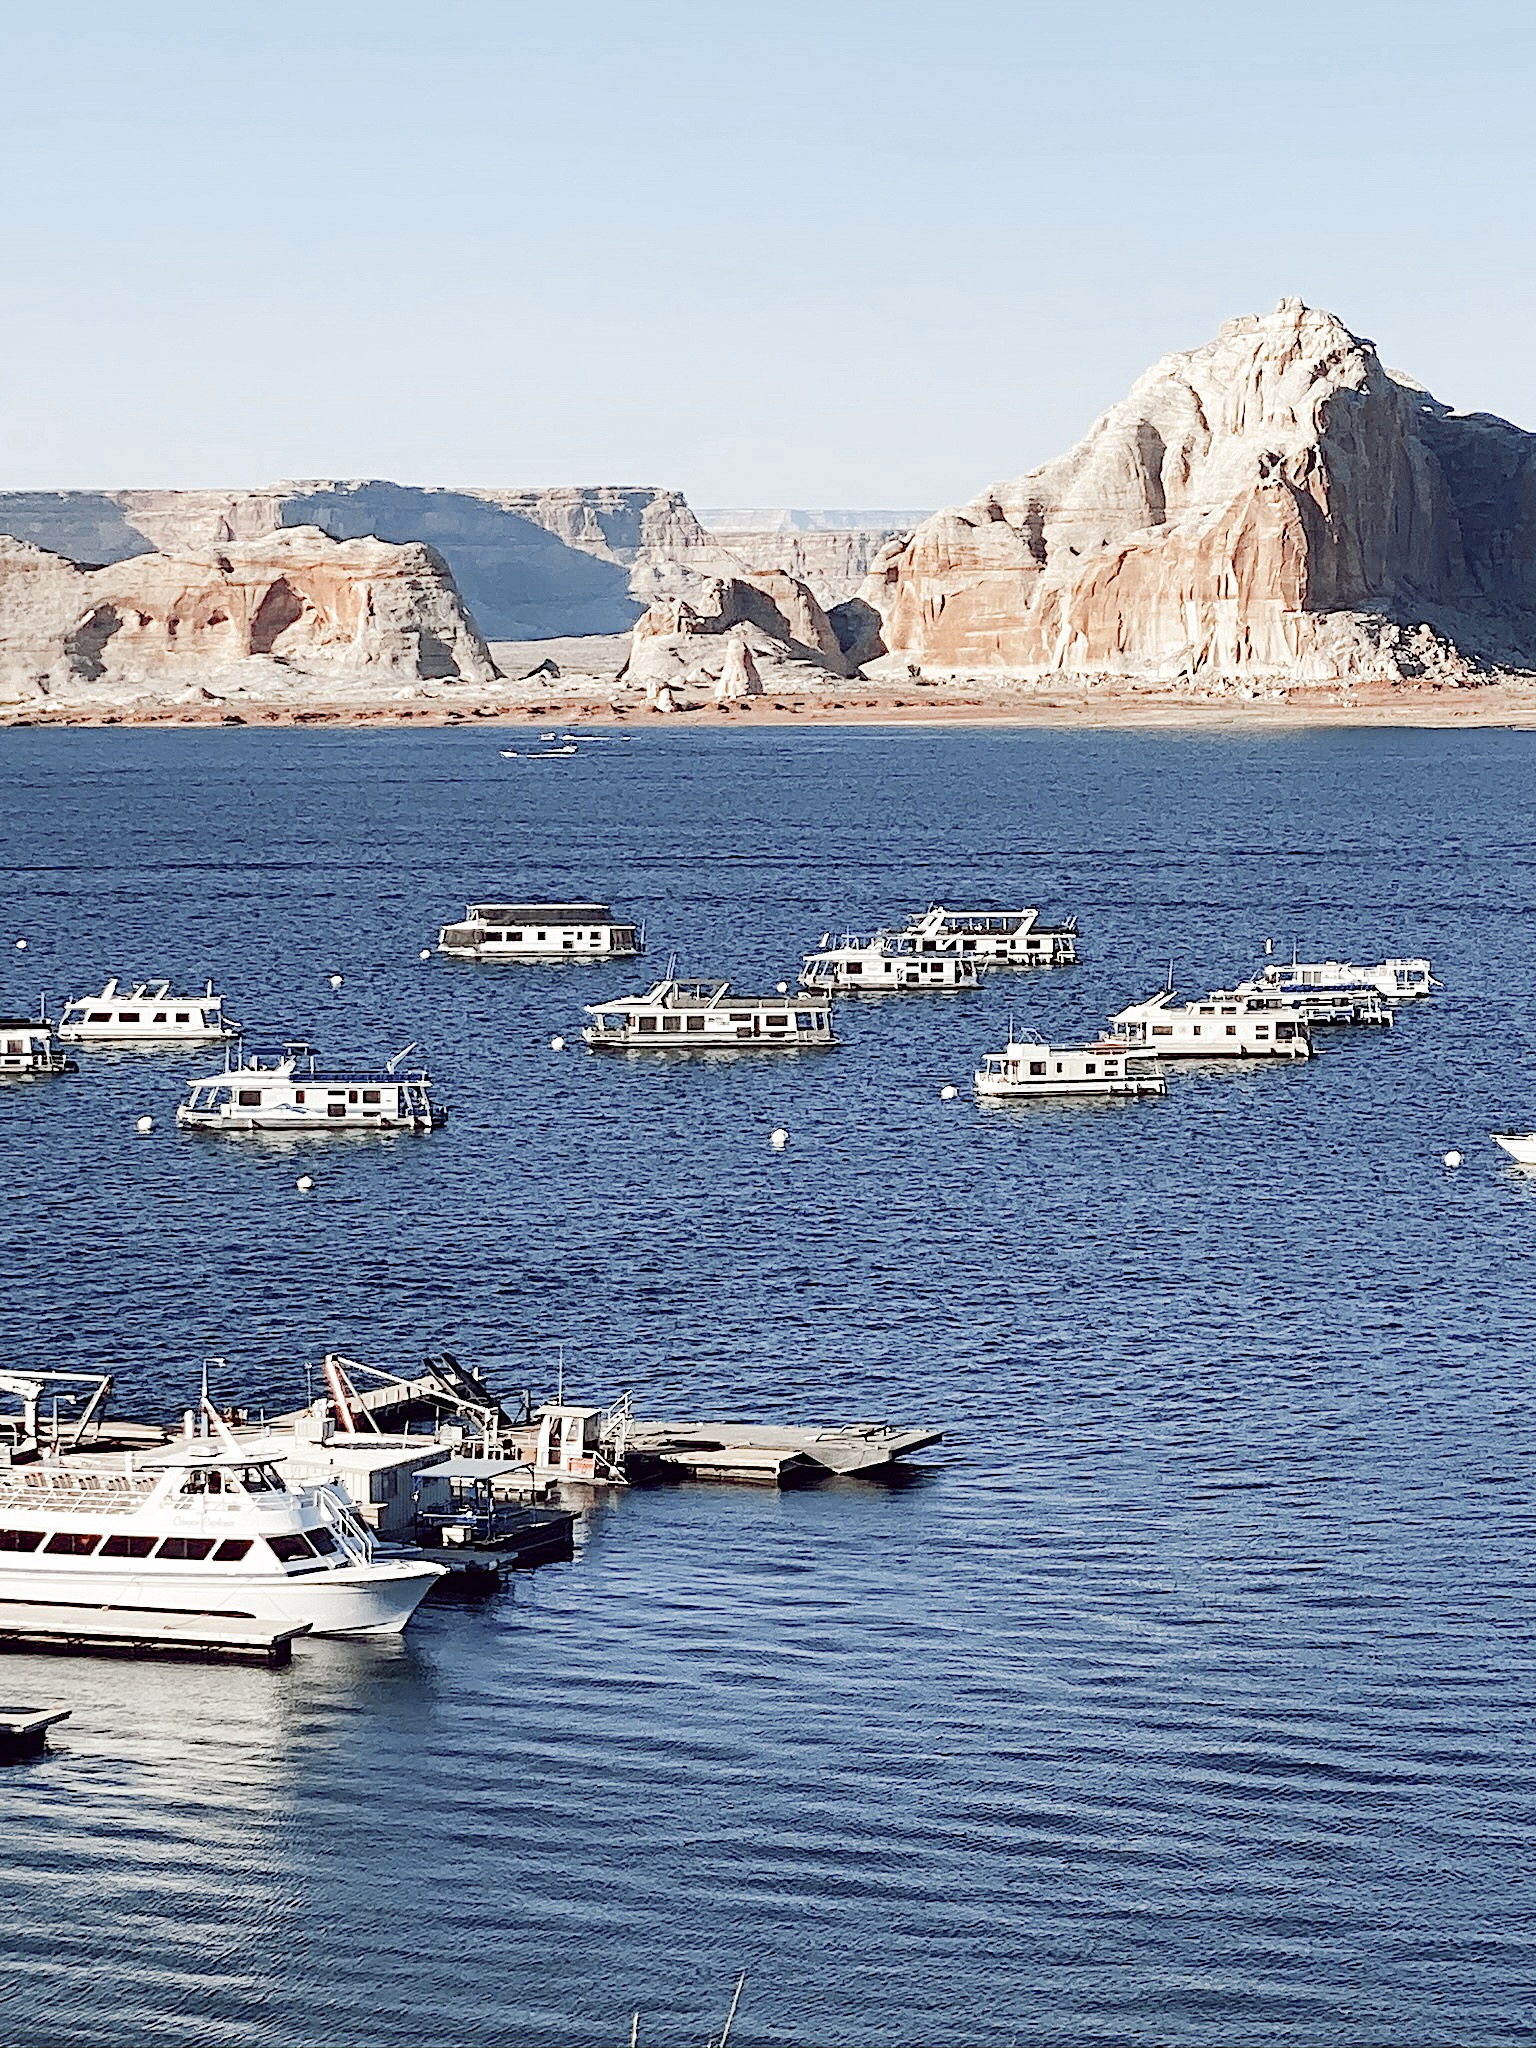 lake powell houseboat - things to do in page arizona